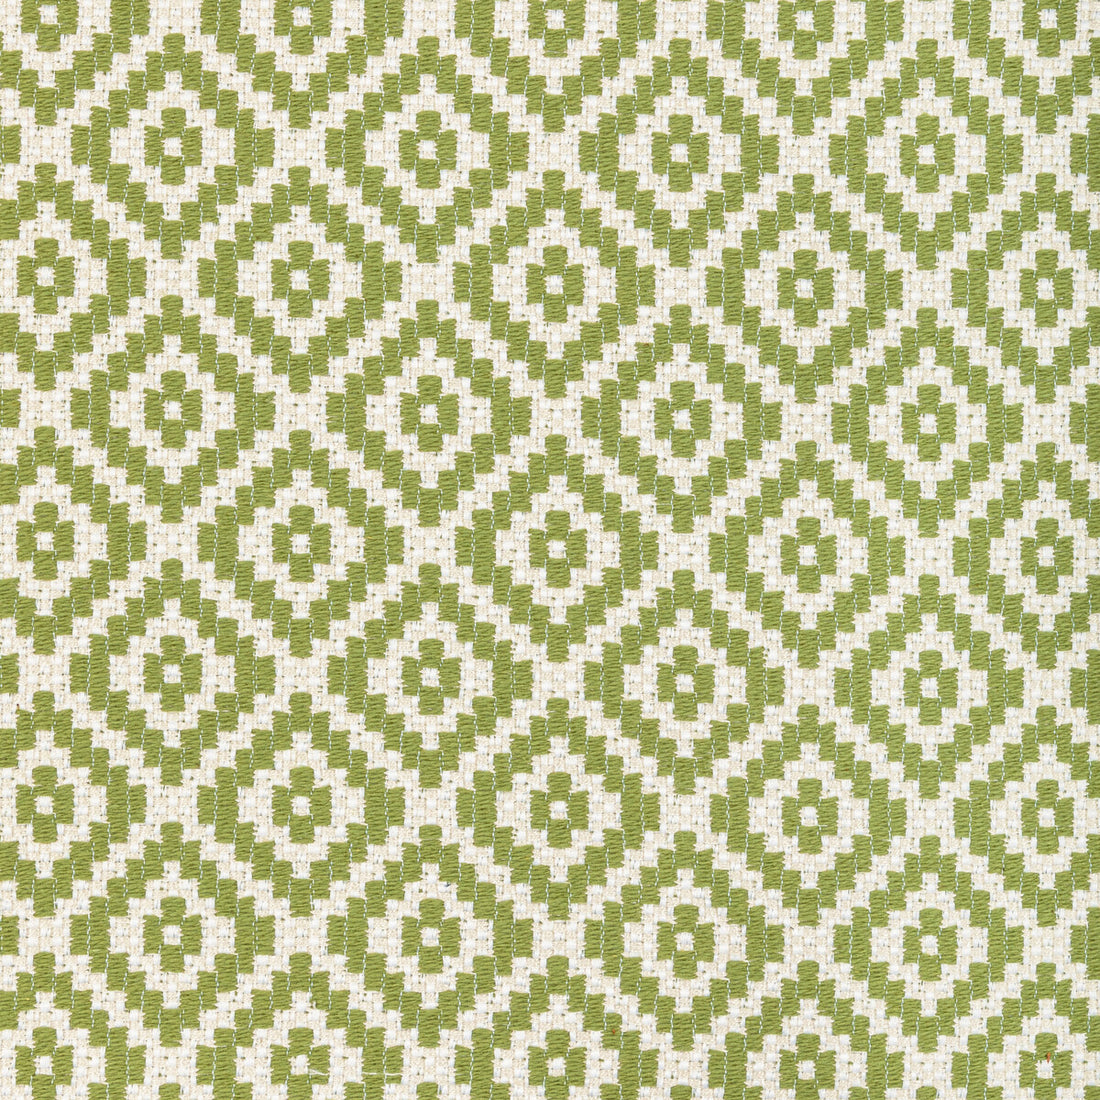 Kravet Design fabric in 36411-23 color - pattern 36411.23.0 - by Kravet Design in the Performance Crypton Home collection